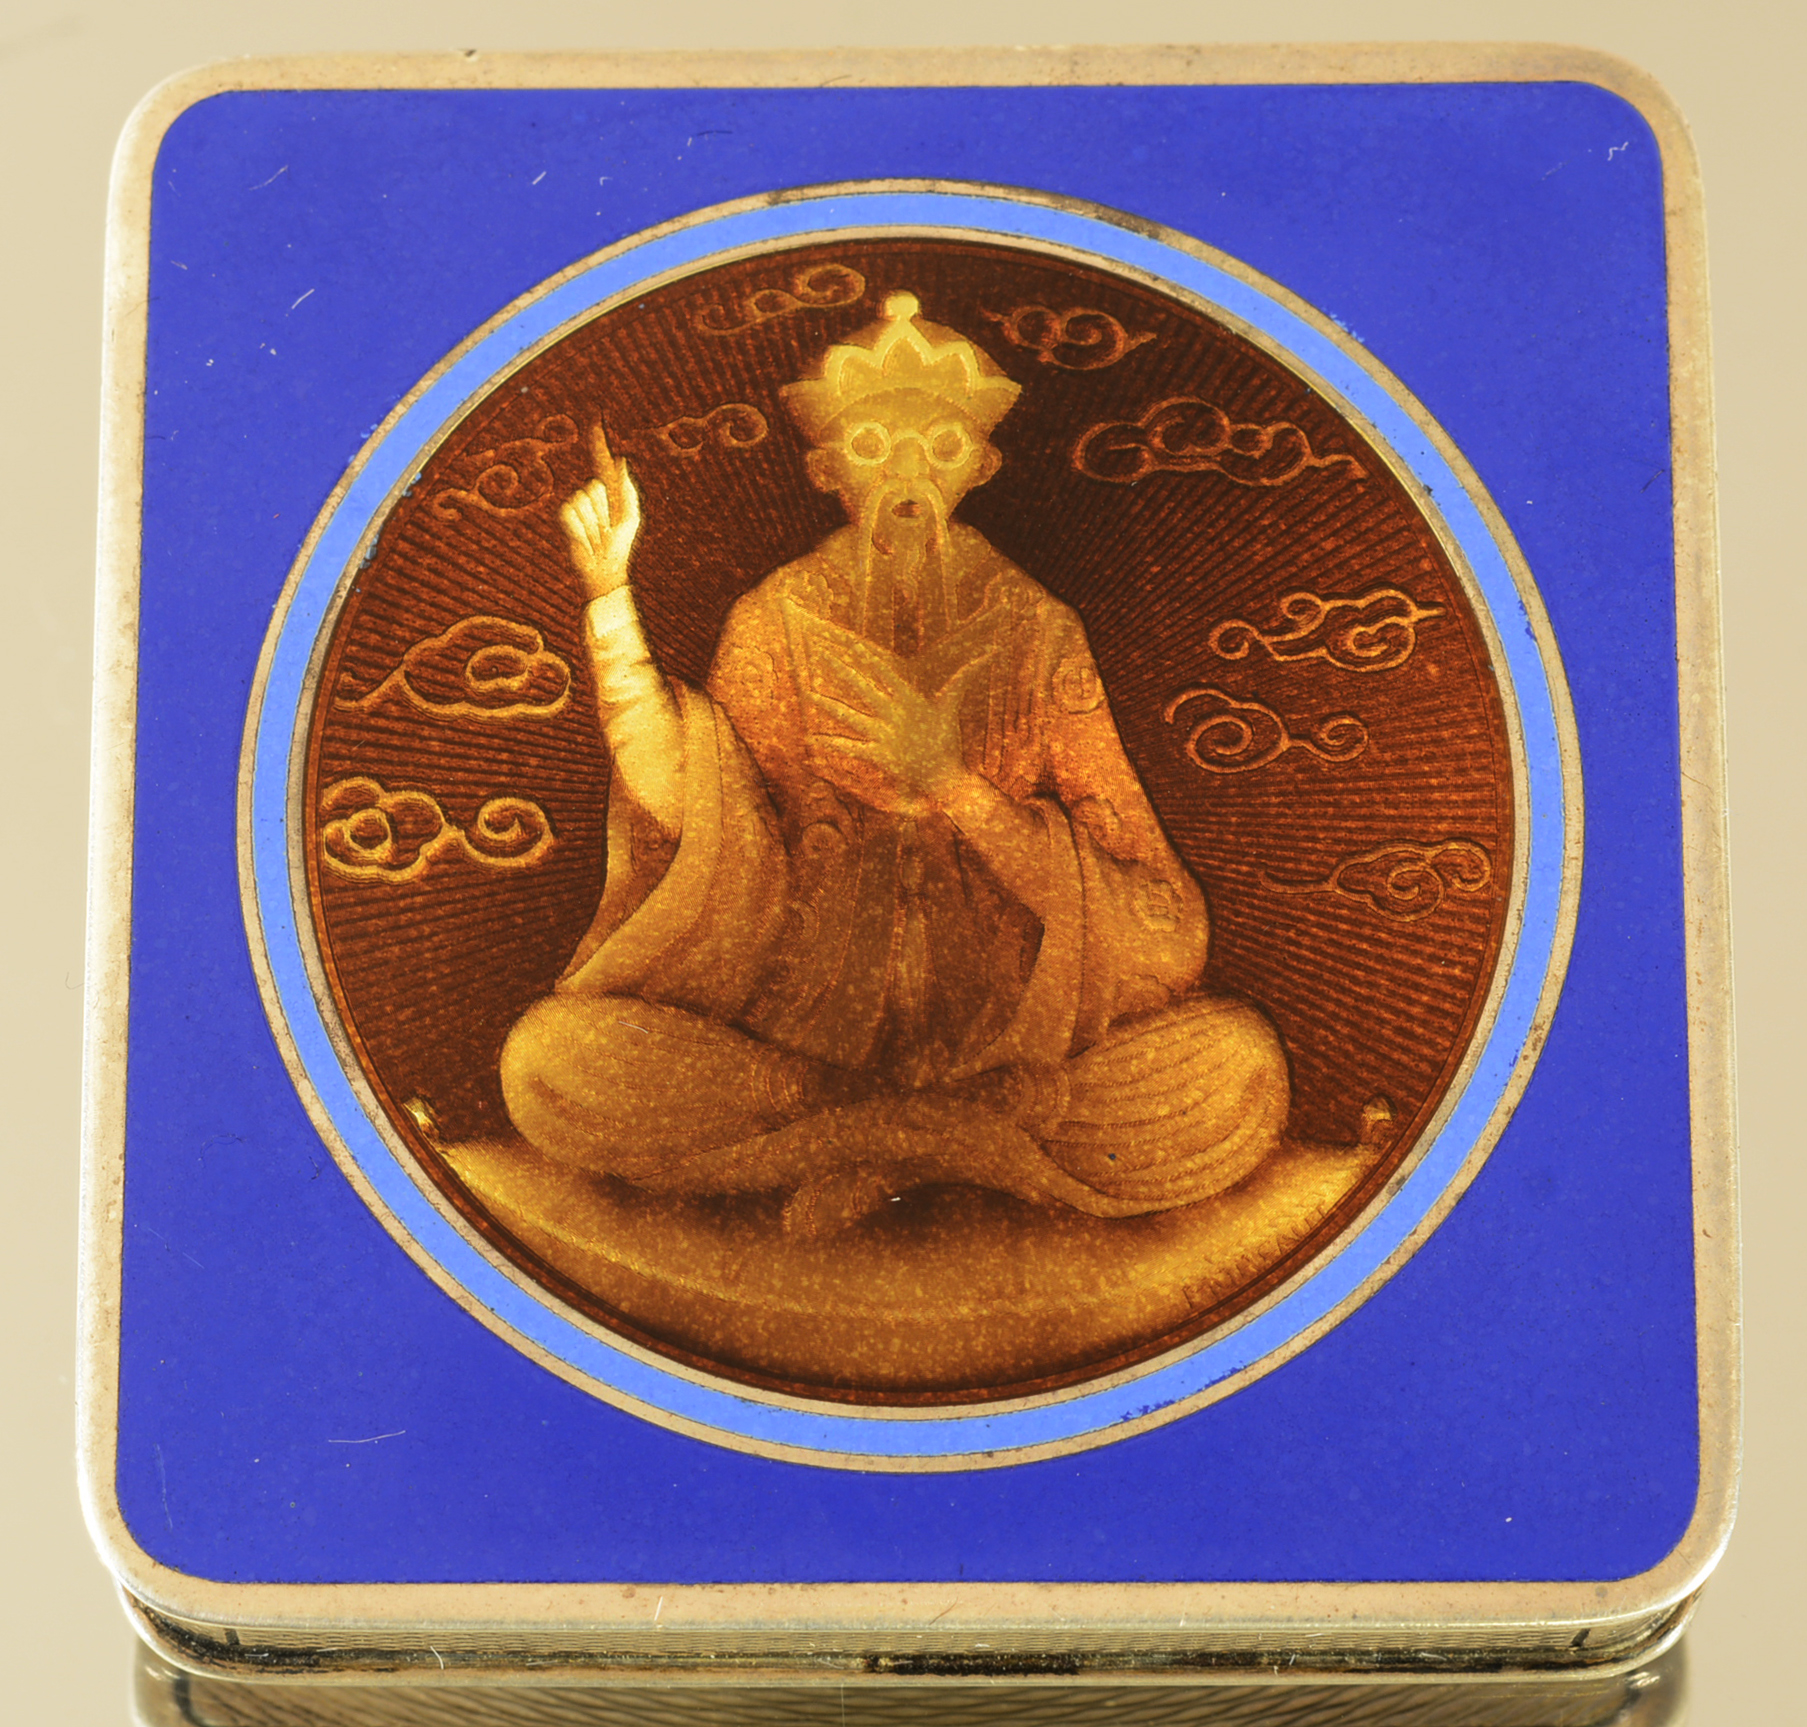 French enameled silver box with portrait of Chinese prophet, pull out brush on bottom, artist-signed Morlaut, total weight 2.19 troy ounces, 2in x 2in, circa 1890. Estimate: $800-$1,200. Bruhns Auction Gallery image